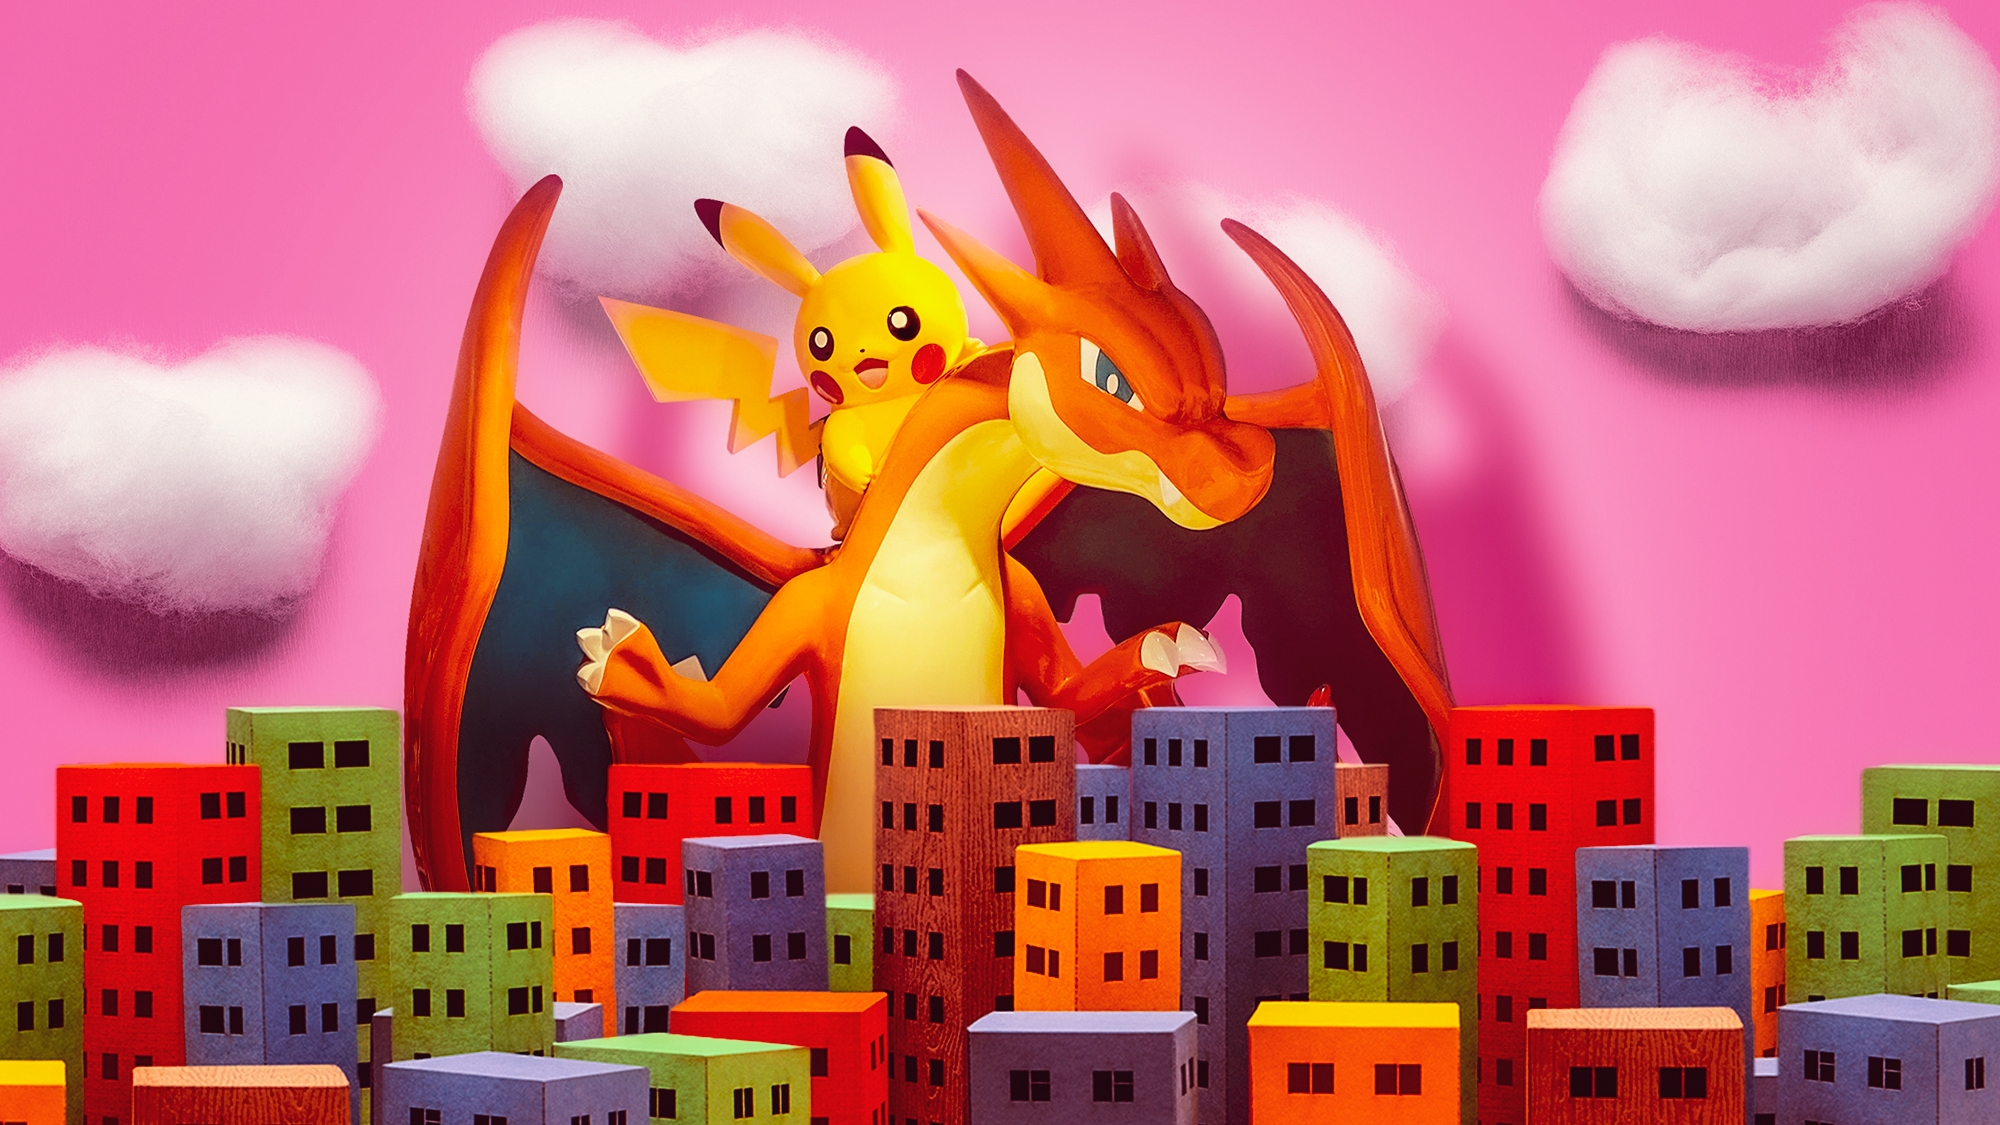 Pikachu rides a Godzilla-like creature over a city in this a cartoon illustration depicting the Pokémon franchise’s dominance.